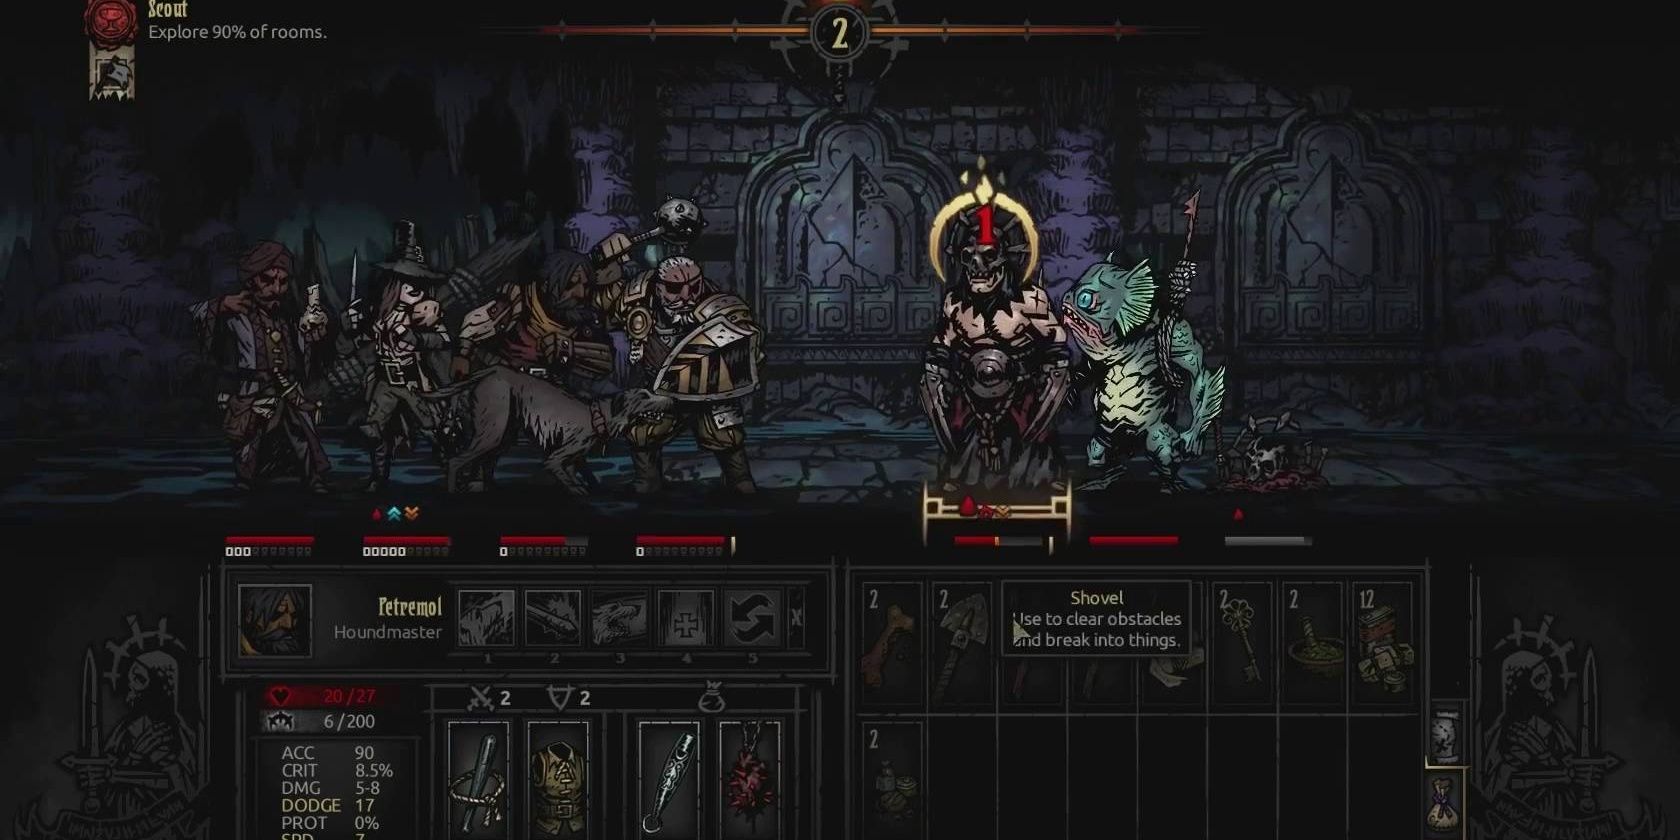 darkest dungeon party combos do anything?